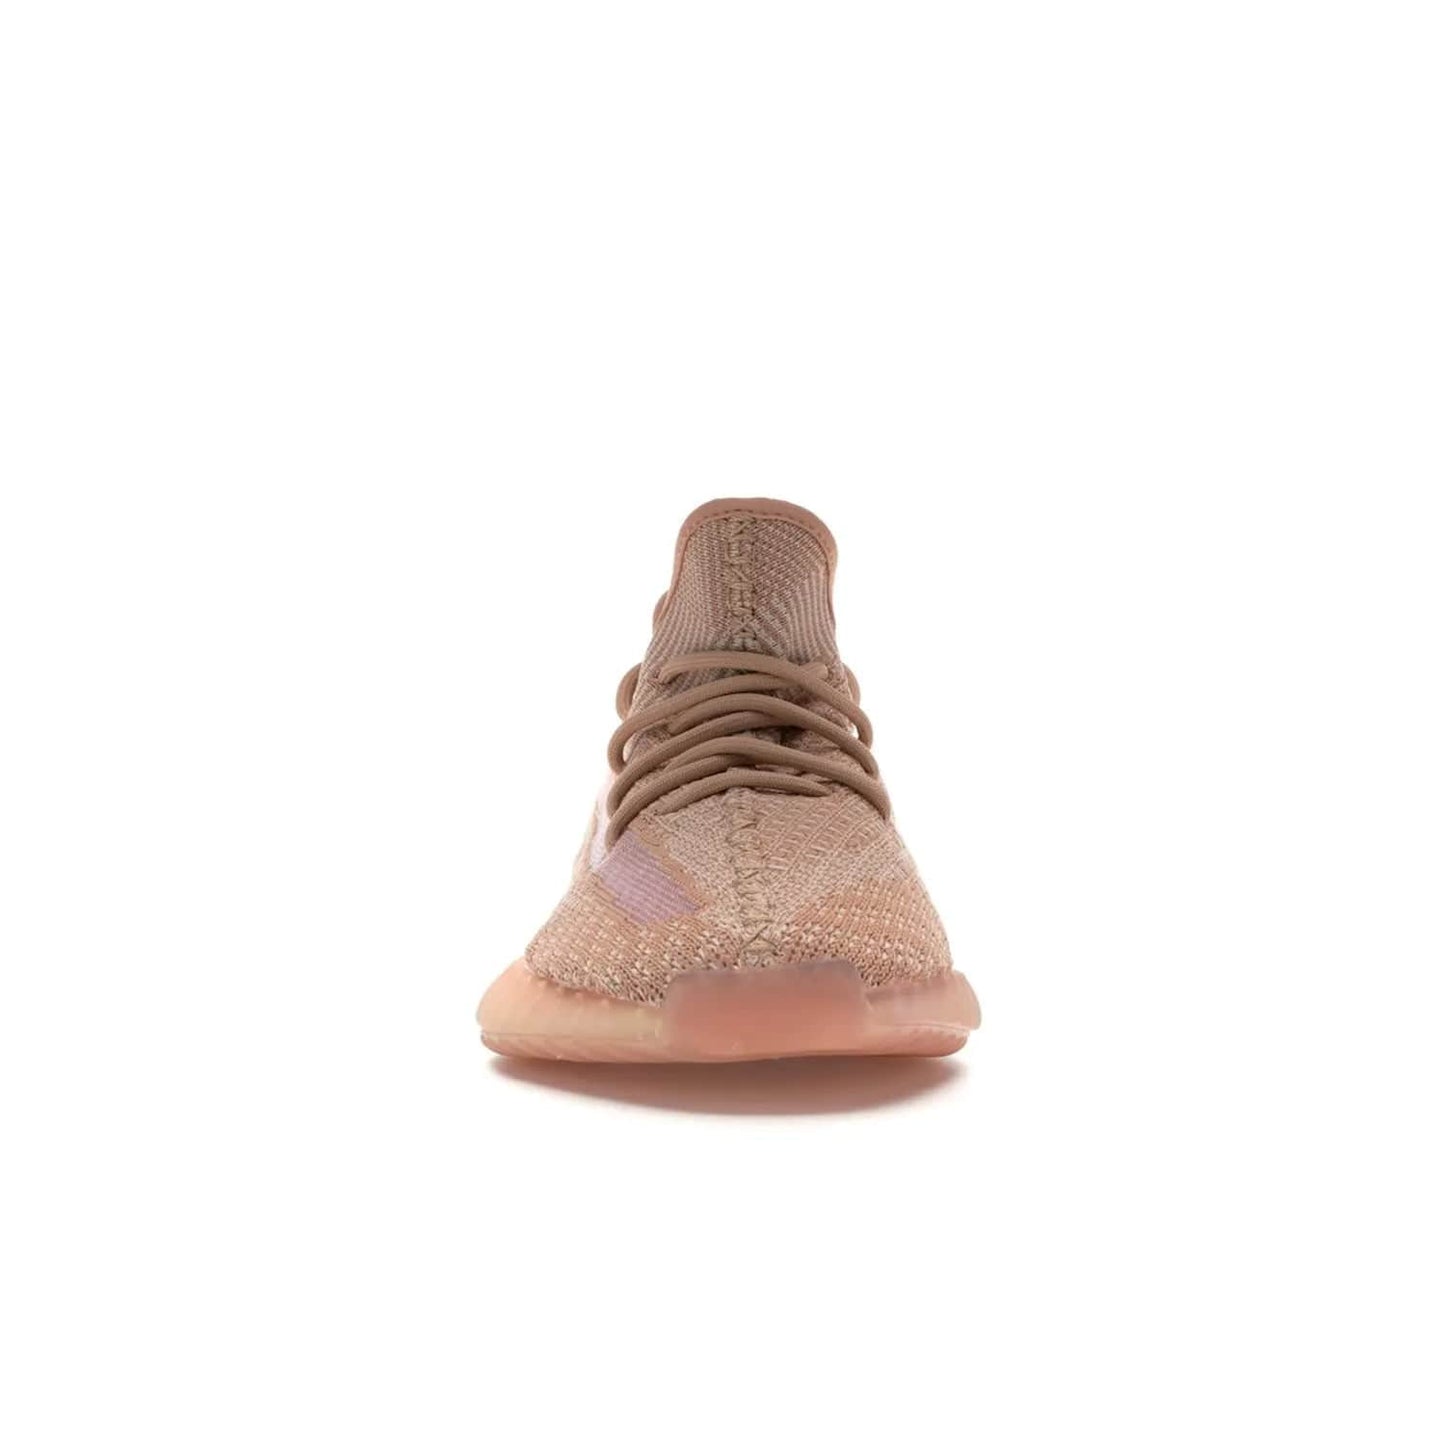 adidas Yeezy Boost 350 V2 Clay - Image 10 - Only at www.BallersClubKickz.com - The adidas Yeezy Boost 350 V2 Clay - style and swag in one shoe. Orange accents, clay midsole and sole. Get yours today!